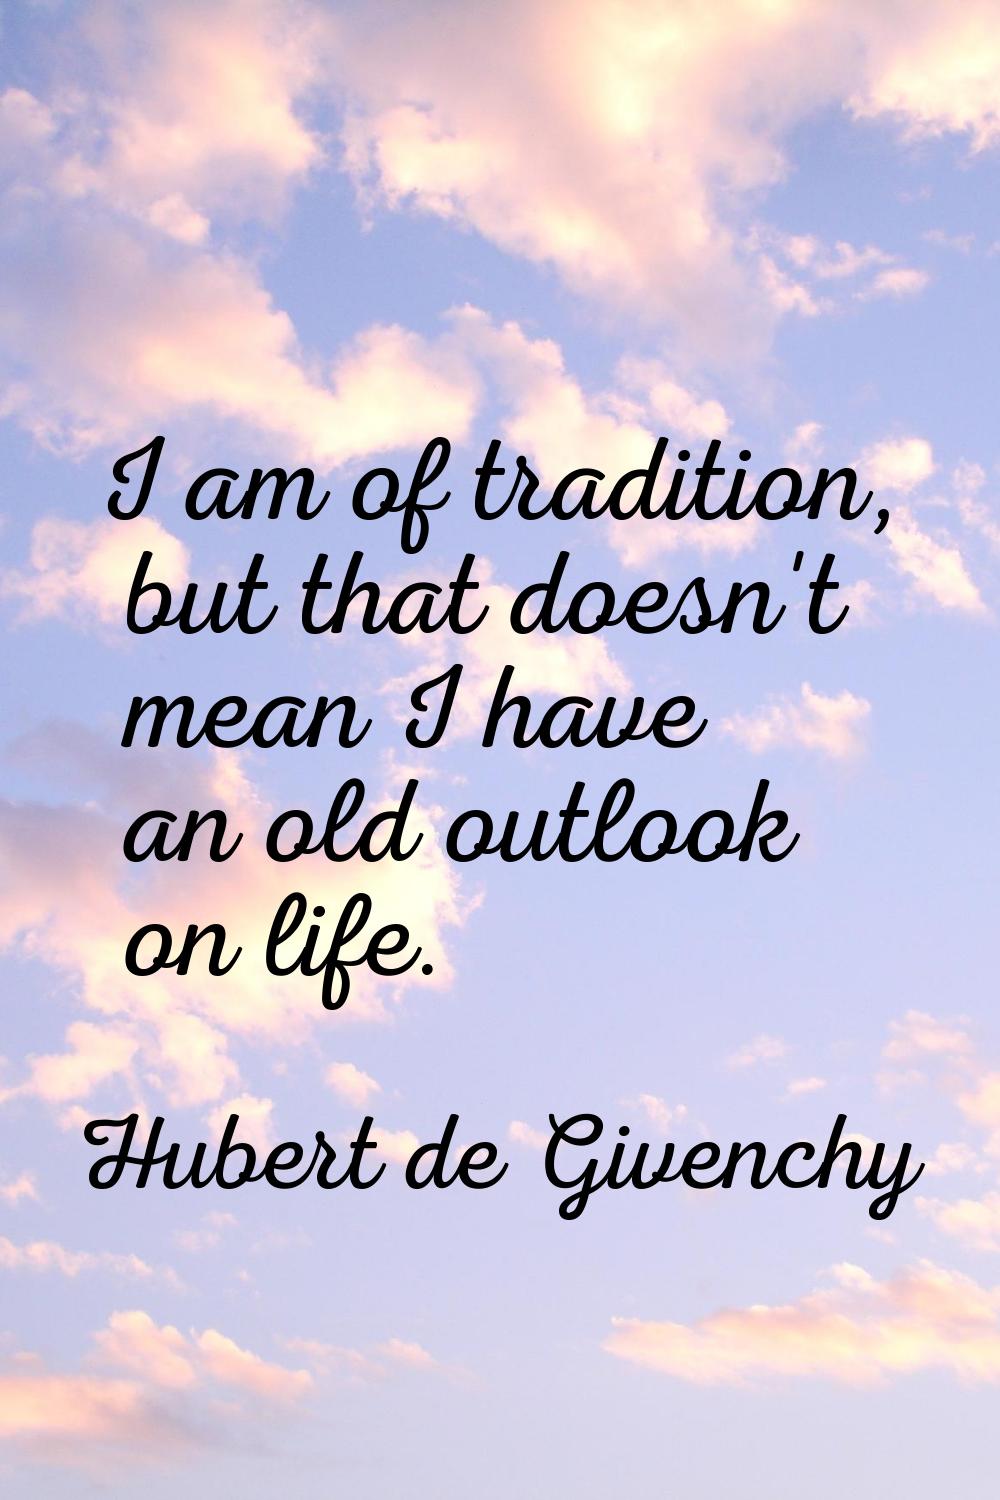 I am of tradition, but that doesn't mean I have an old outlook on life.